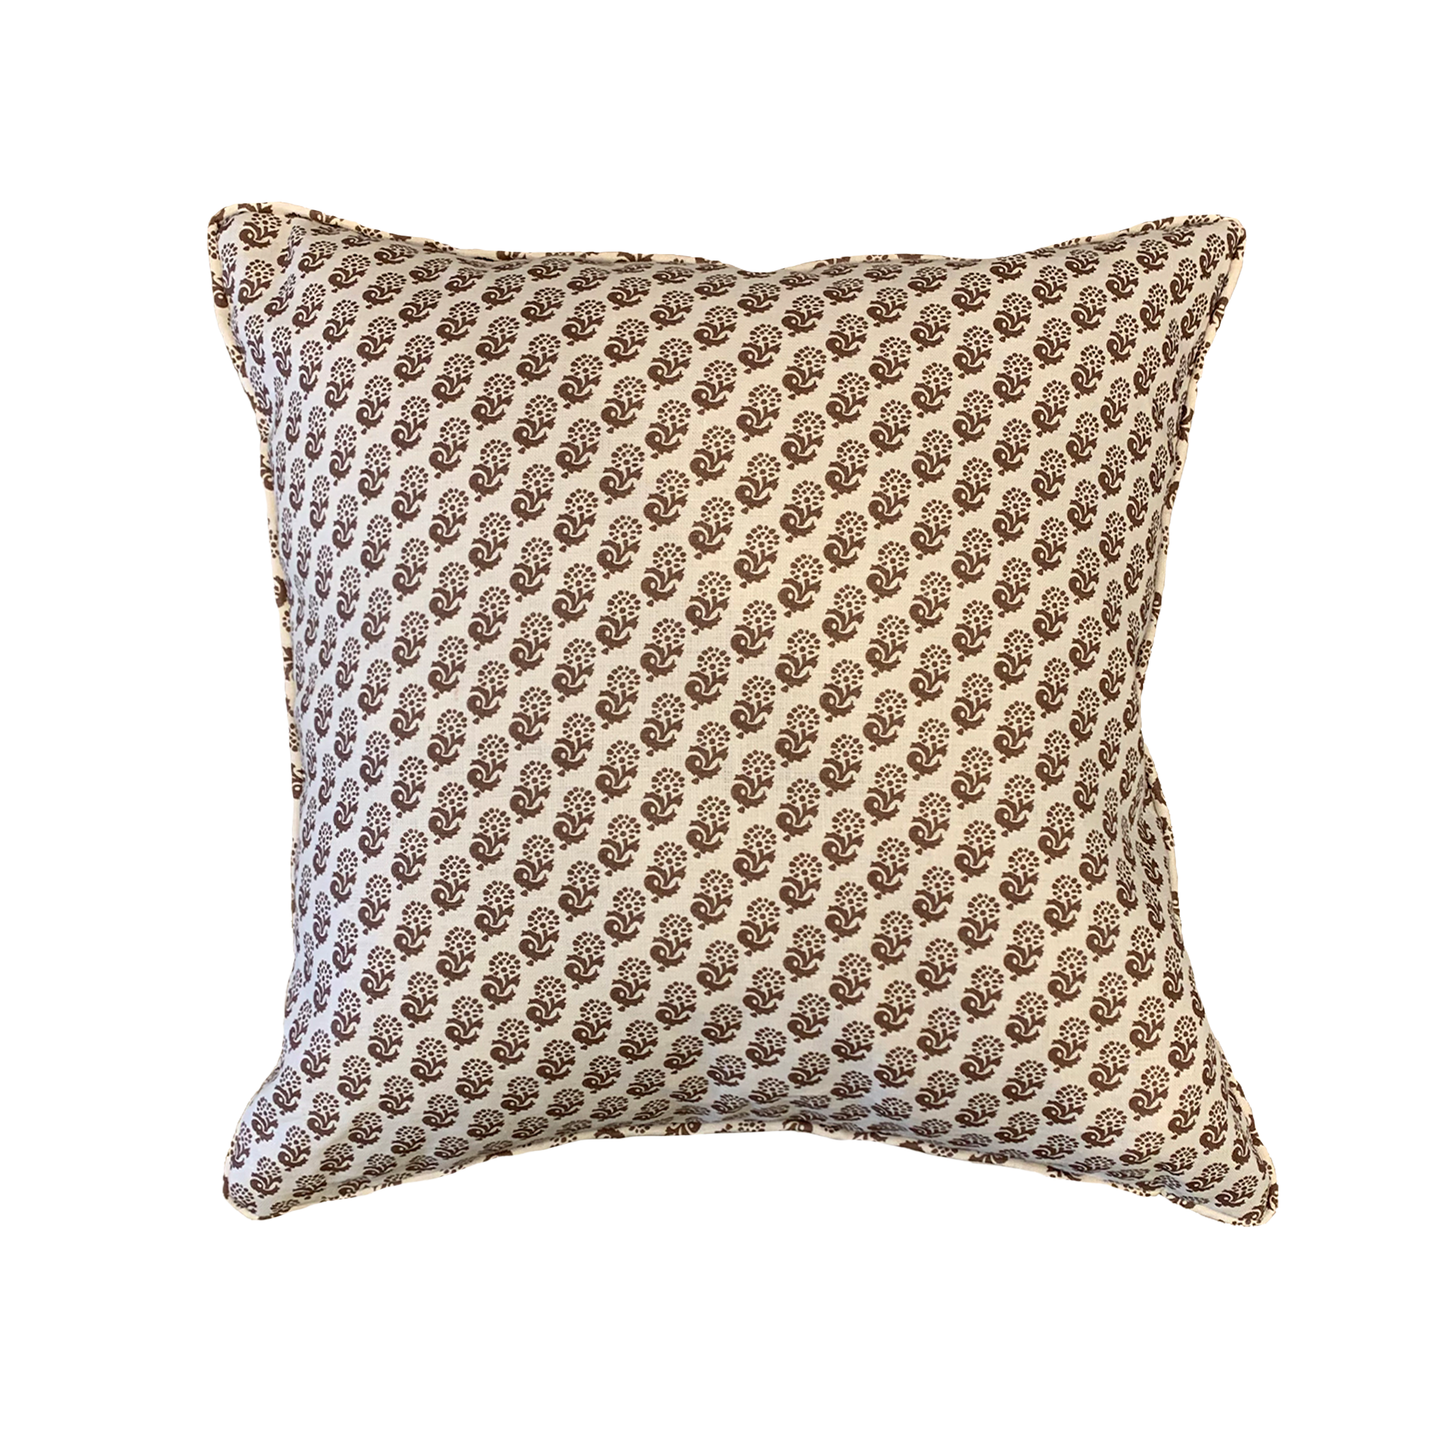 22" x 22" Pillow - Cocoa Flower